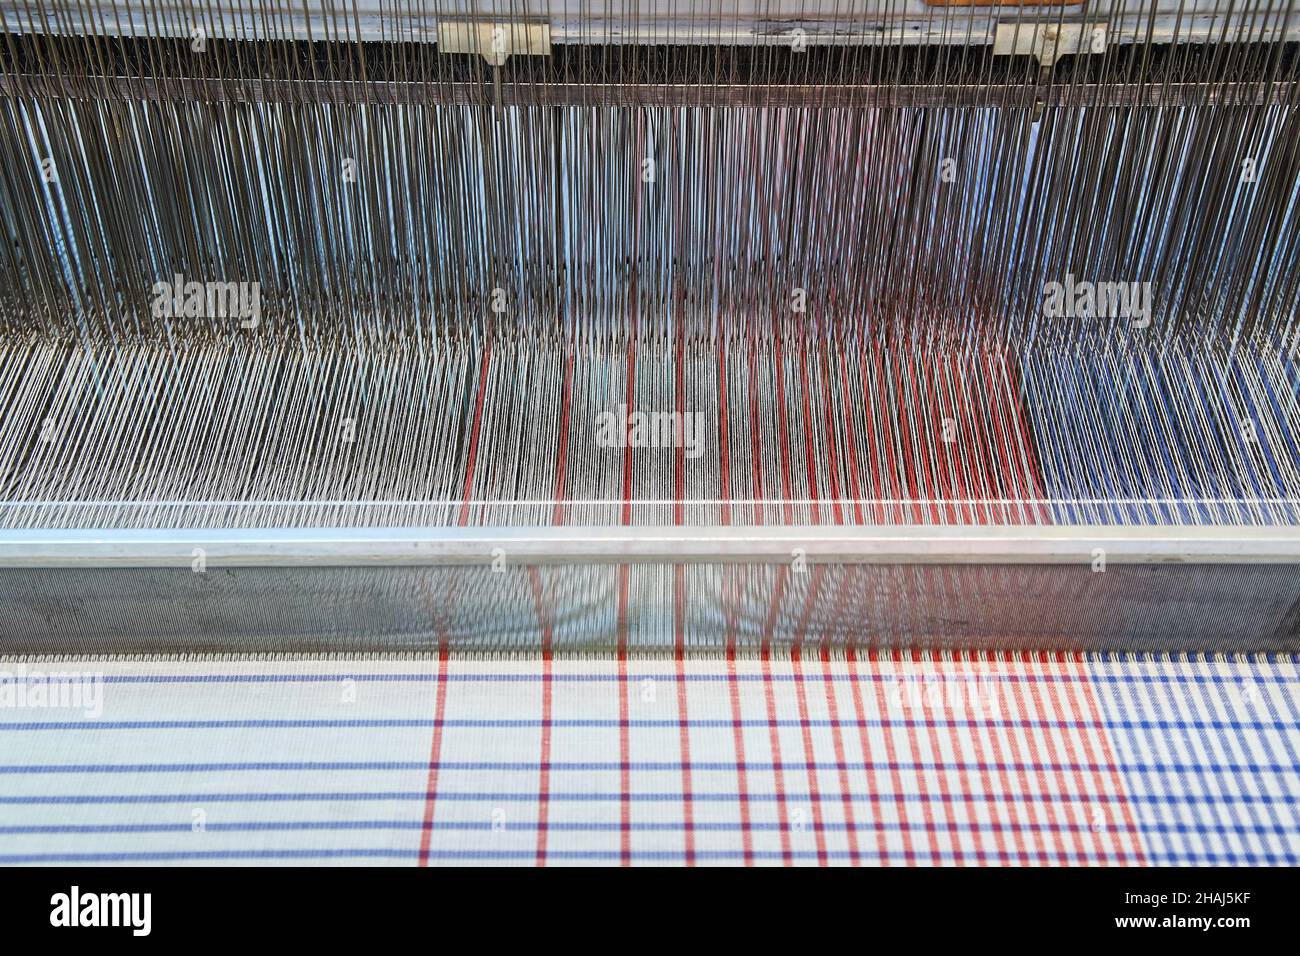 Industrial loom operating Stock Photo